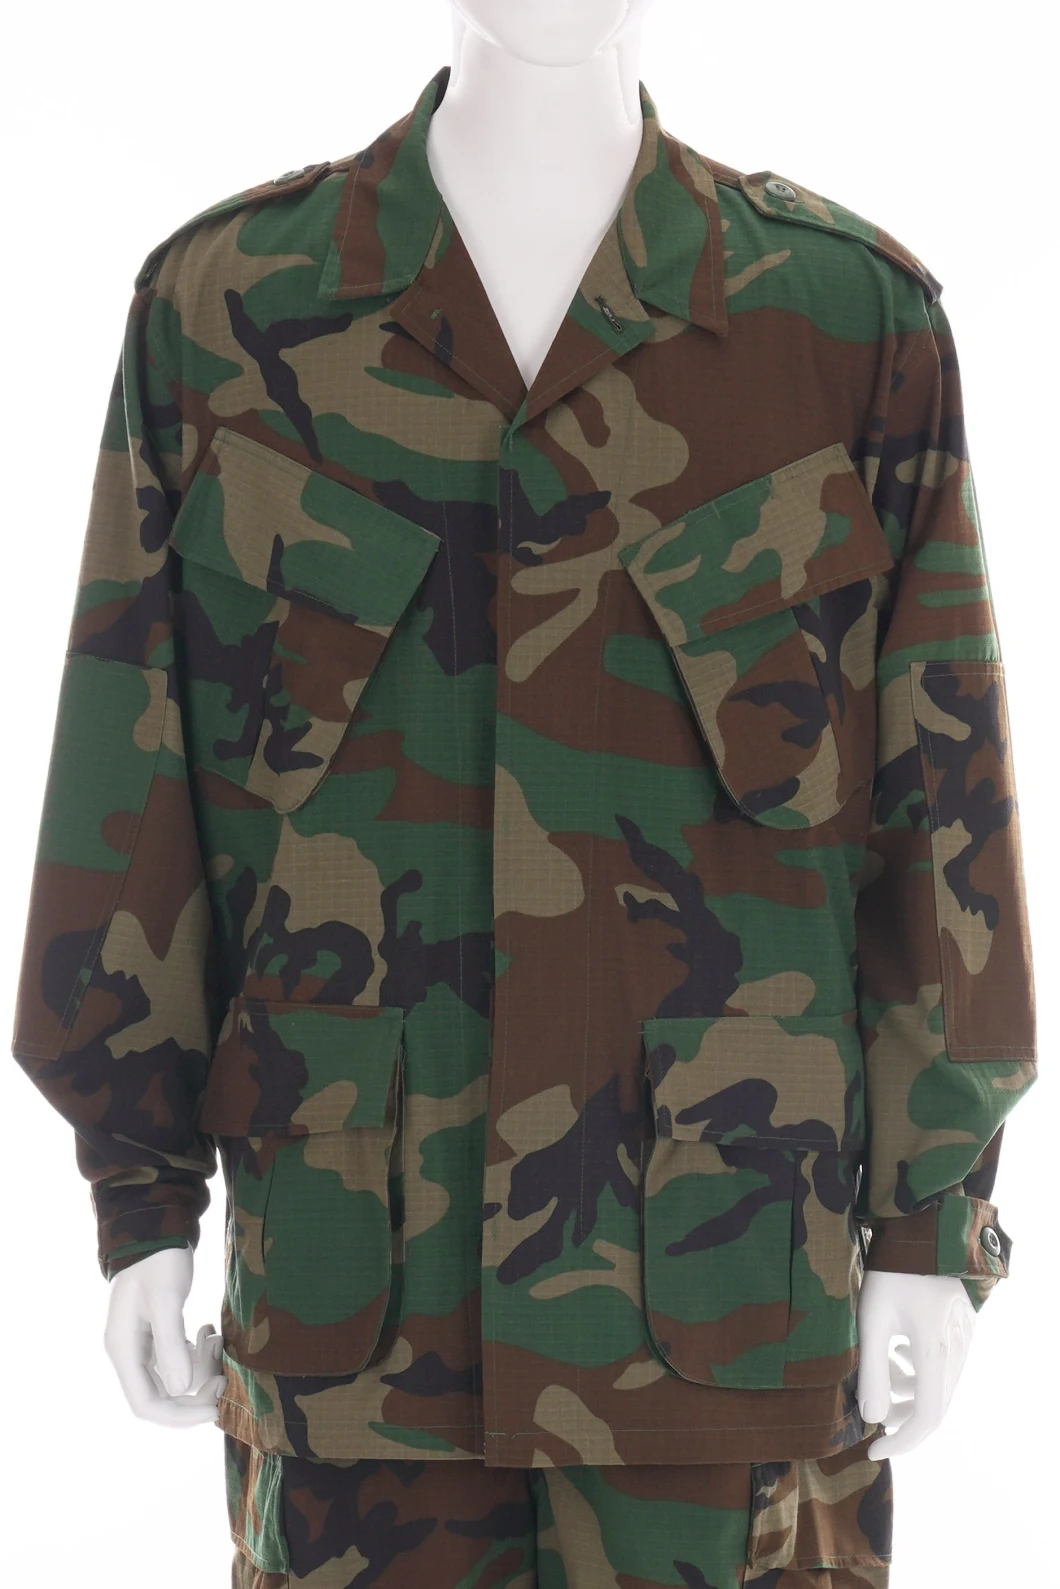 Hot Selling Camo Police Military Army Uniform /Rip-Stop Uniform /Acu Uniform/ Bdu Uniform